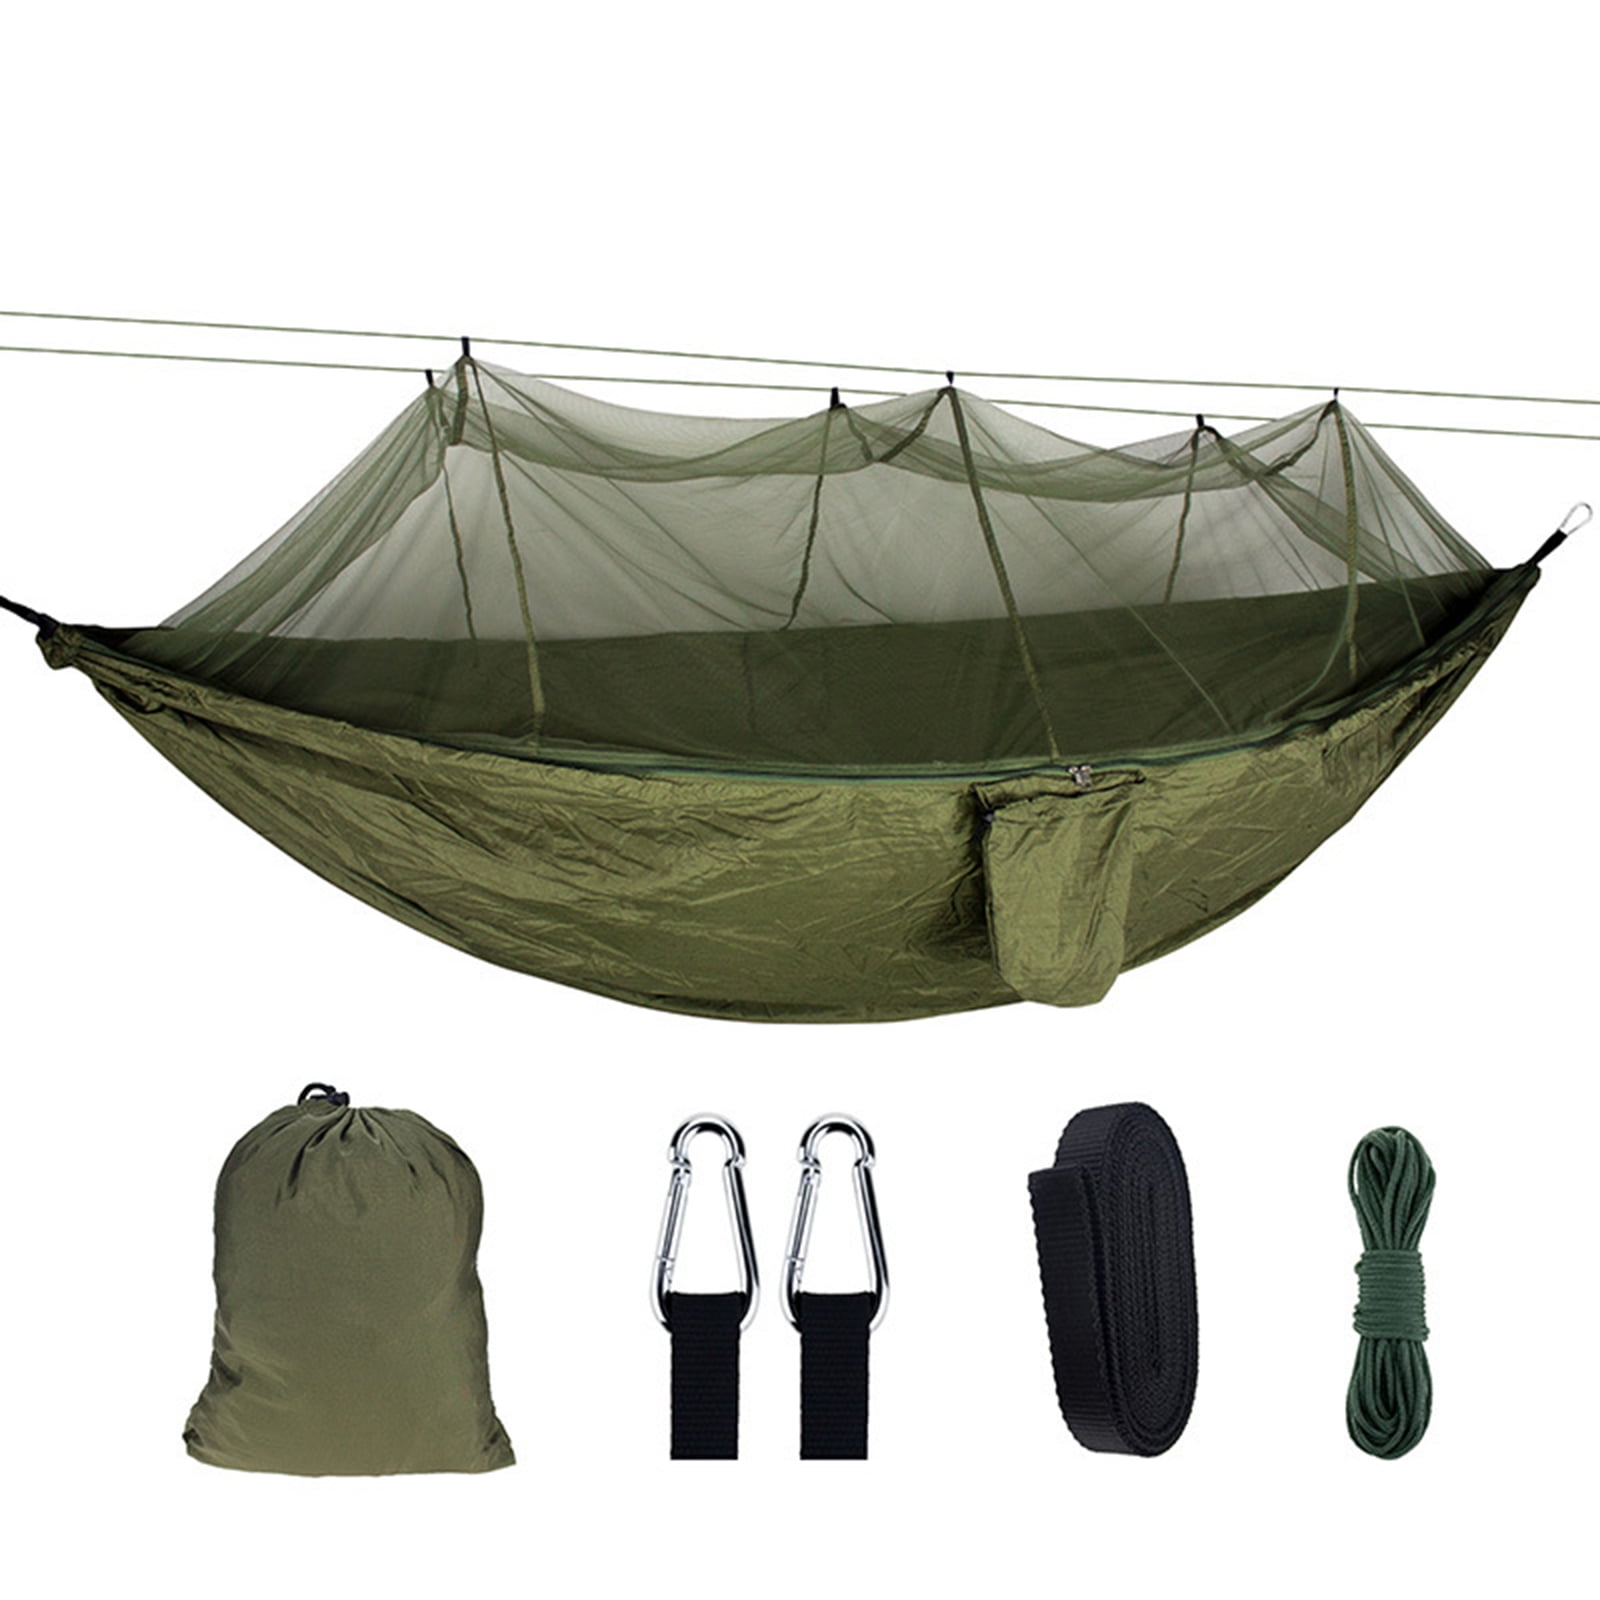 Outdoor Travel Camping Hanging Hammock Bed Sleeping Swing With Mosquito Net Set 